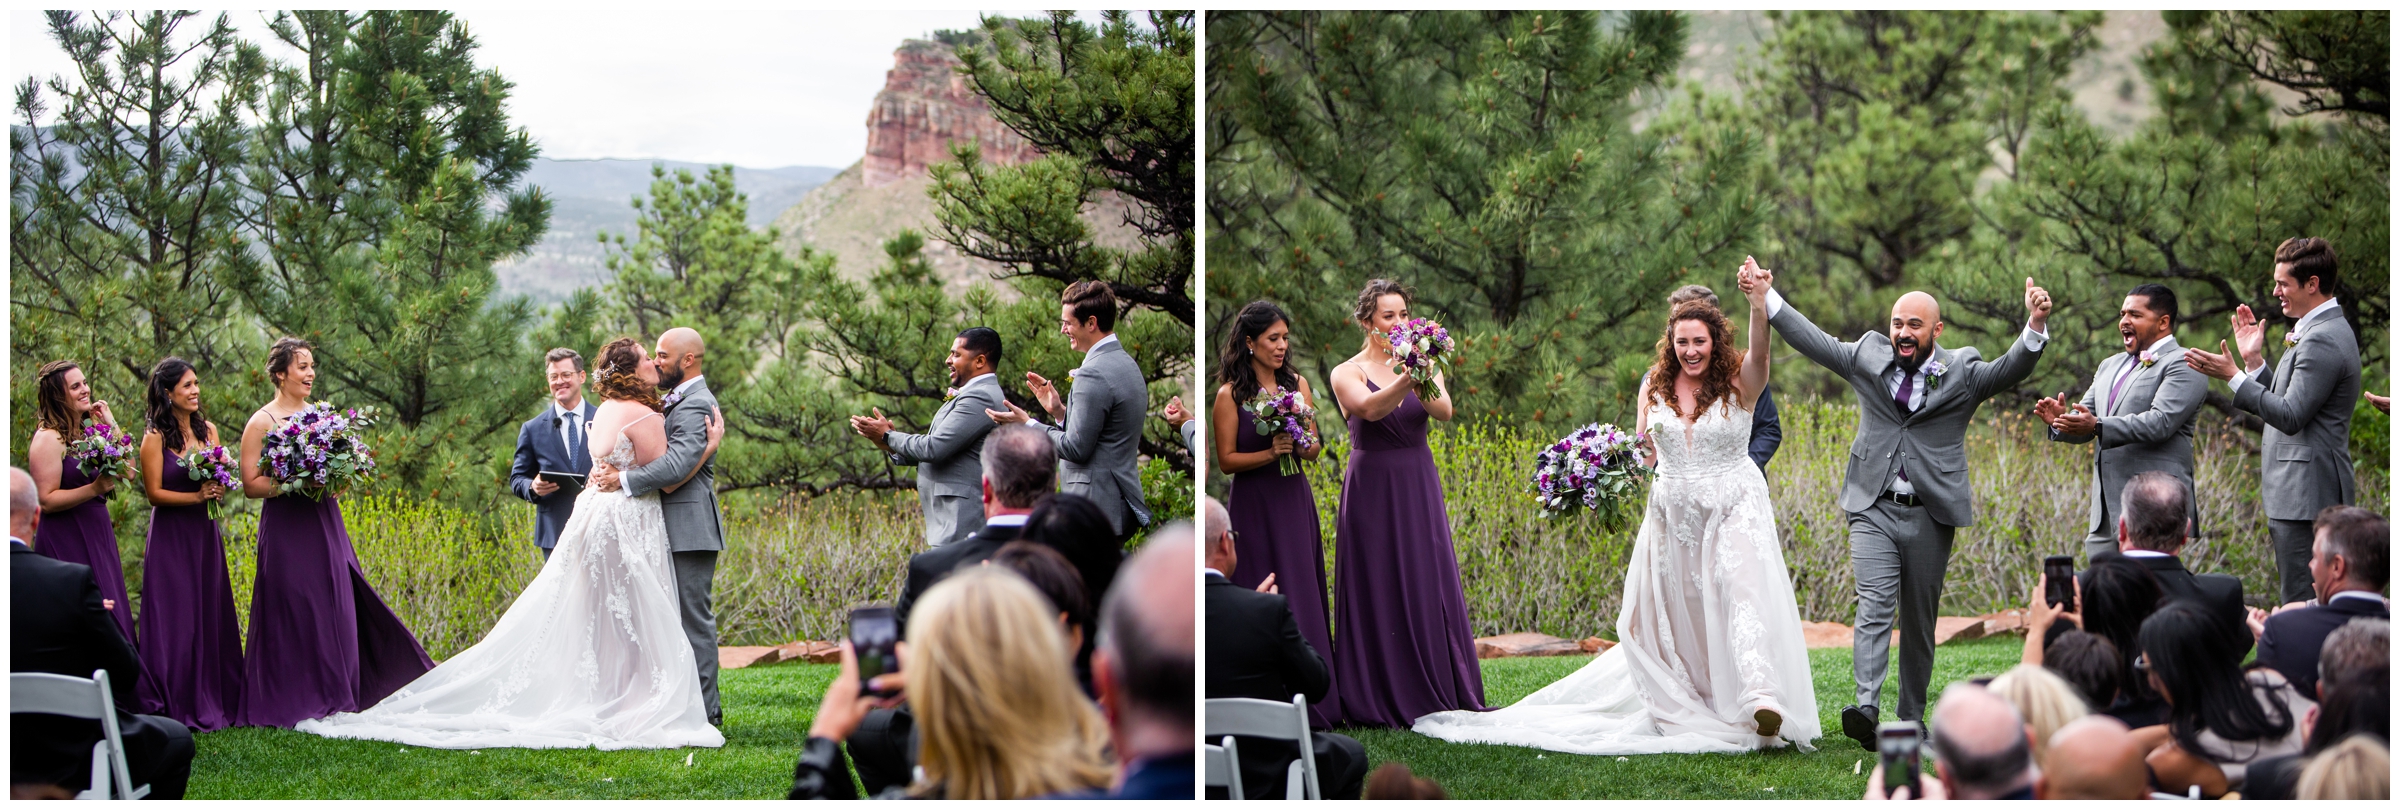 first kiss during outdoor wedding ceremony in the Colorado mountains of Lyons